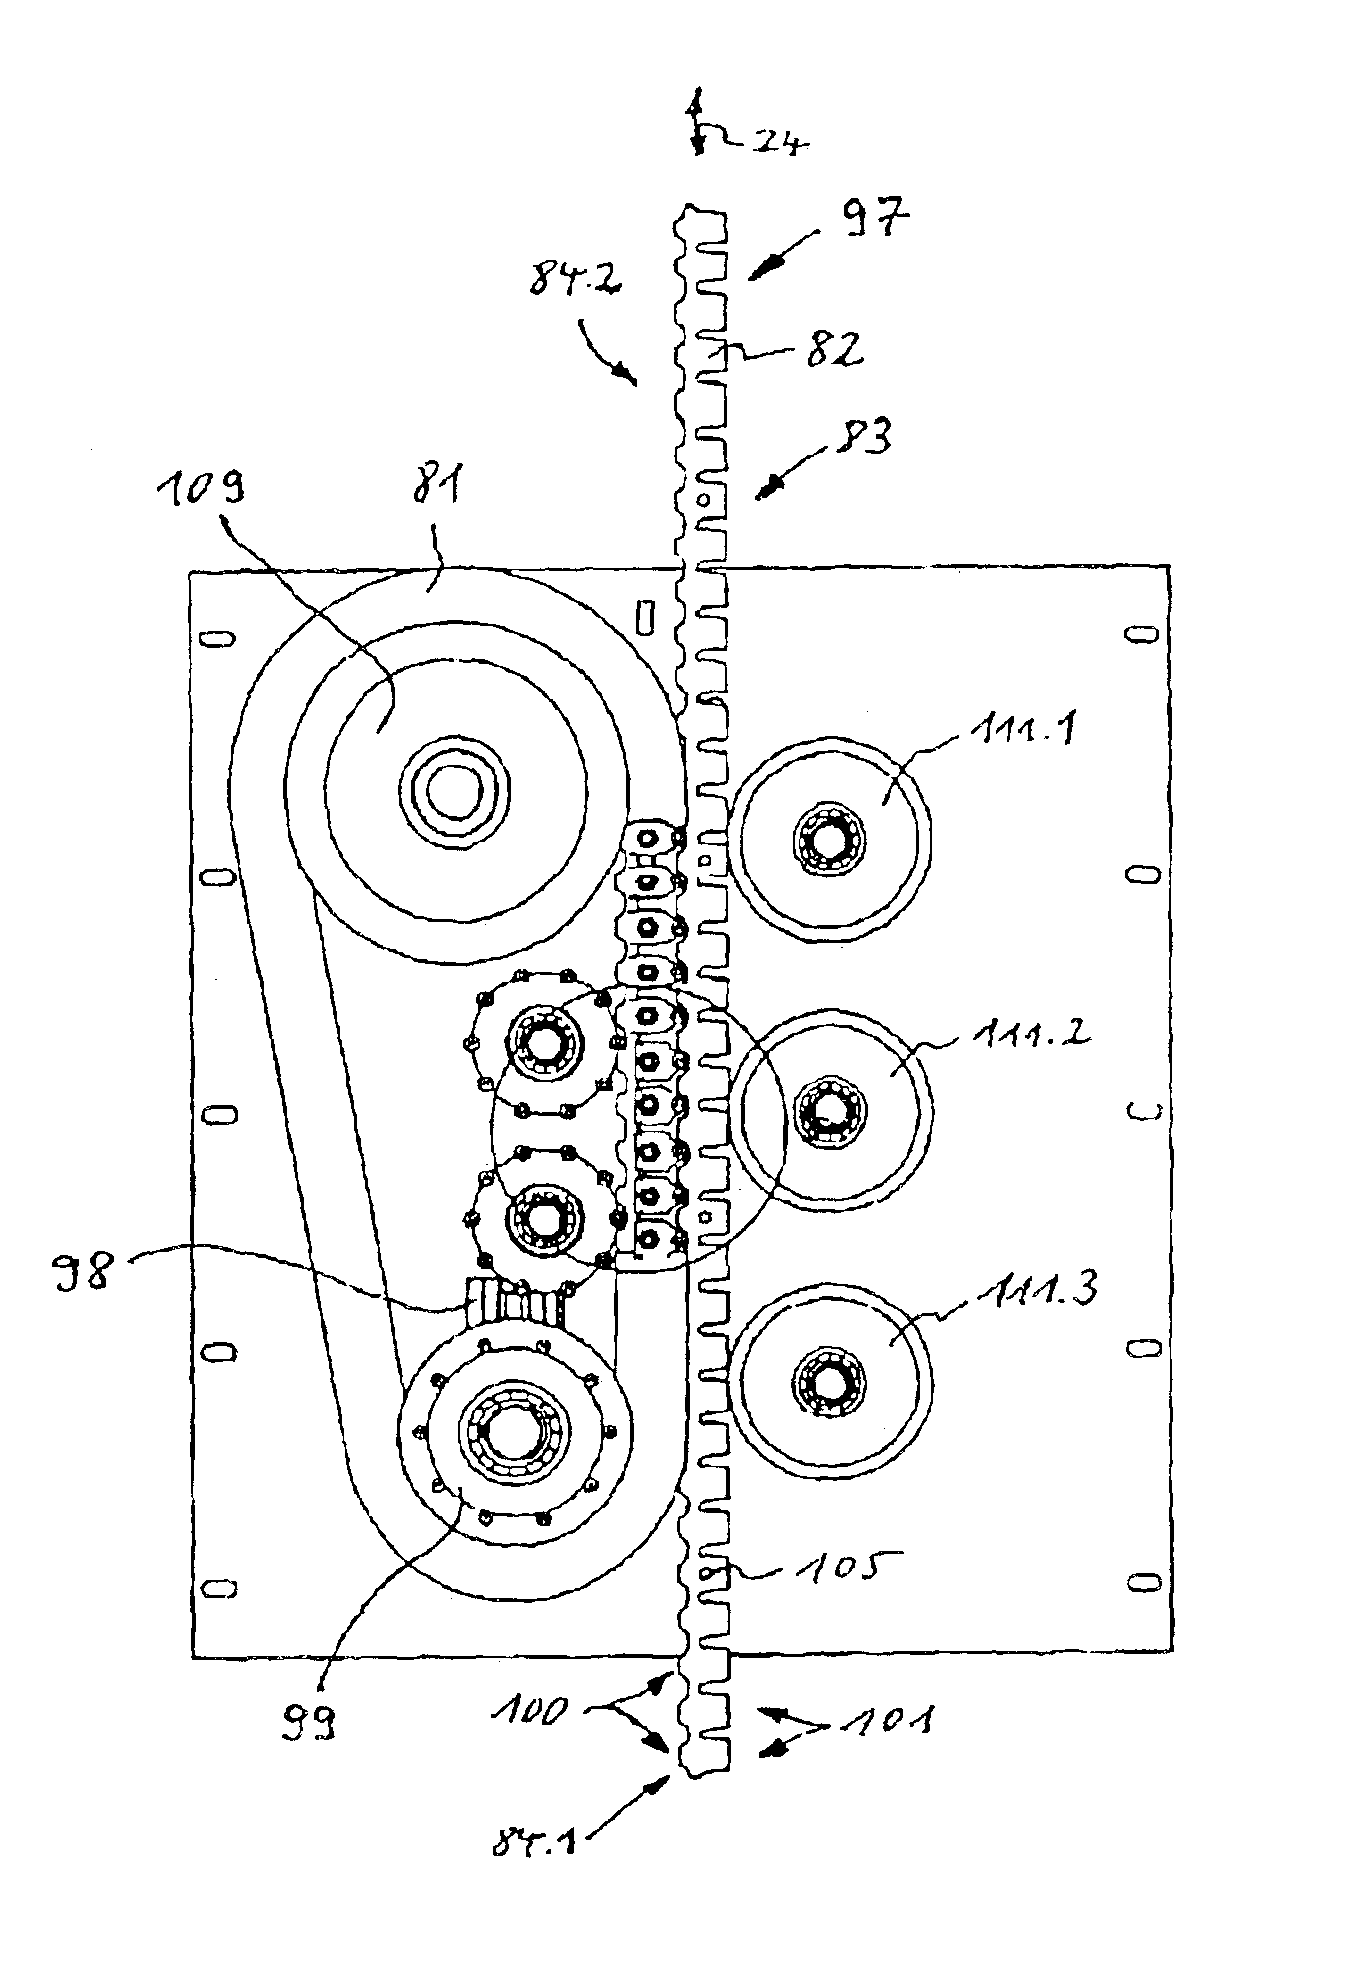 Device for conveying piece goods